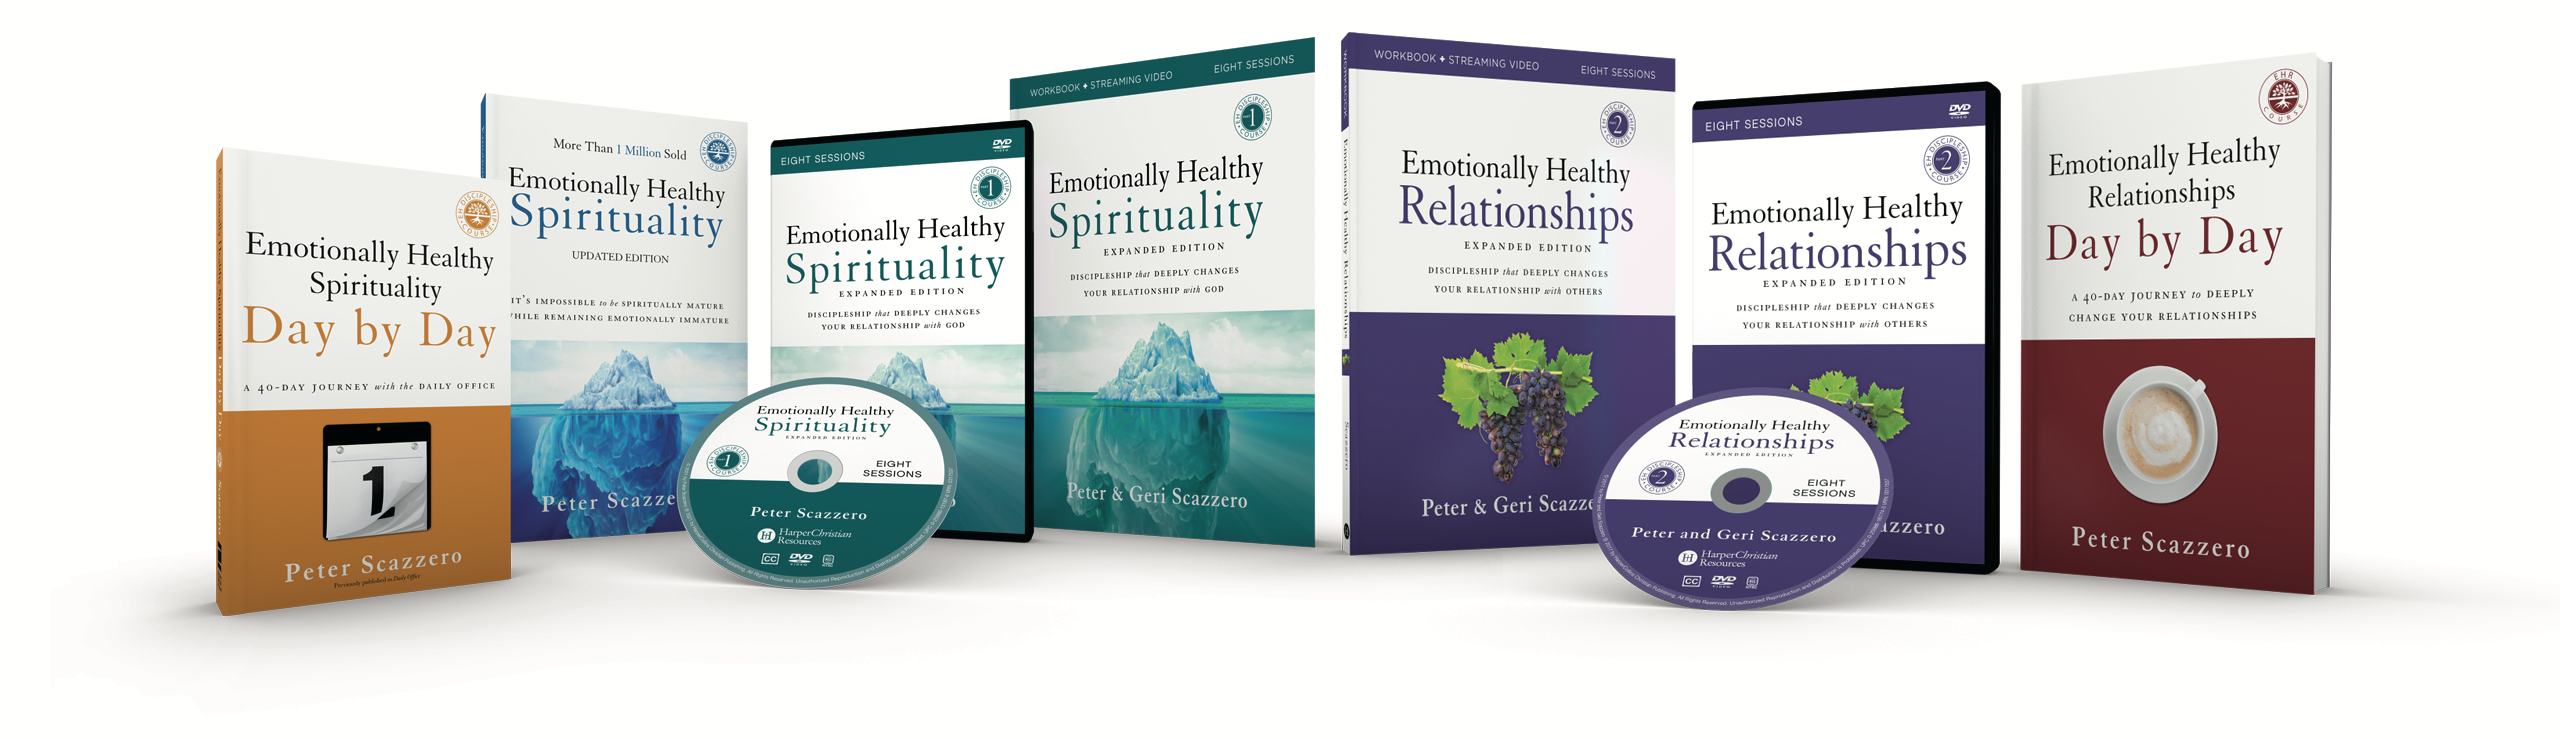 EH Discipleship Course Leader’s Pack with DVD’s Product Image